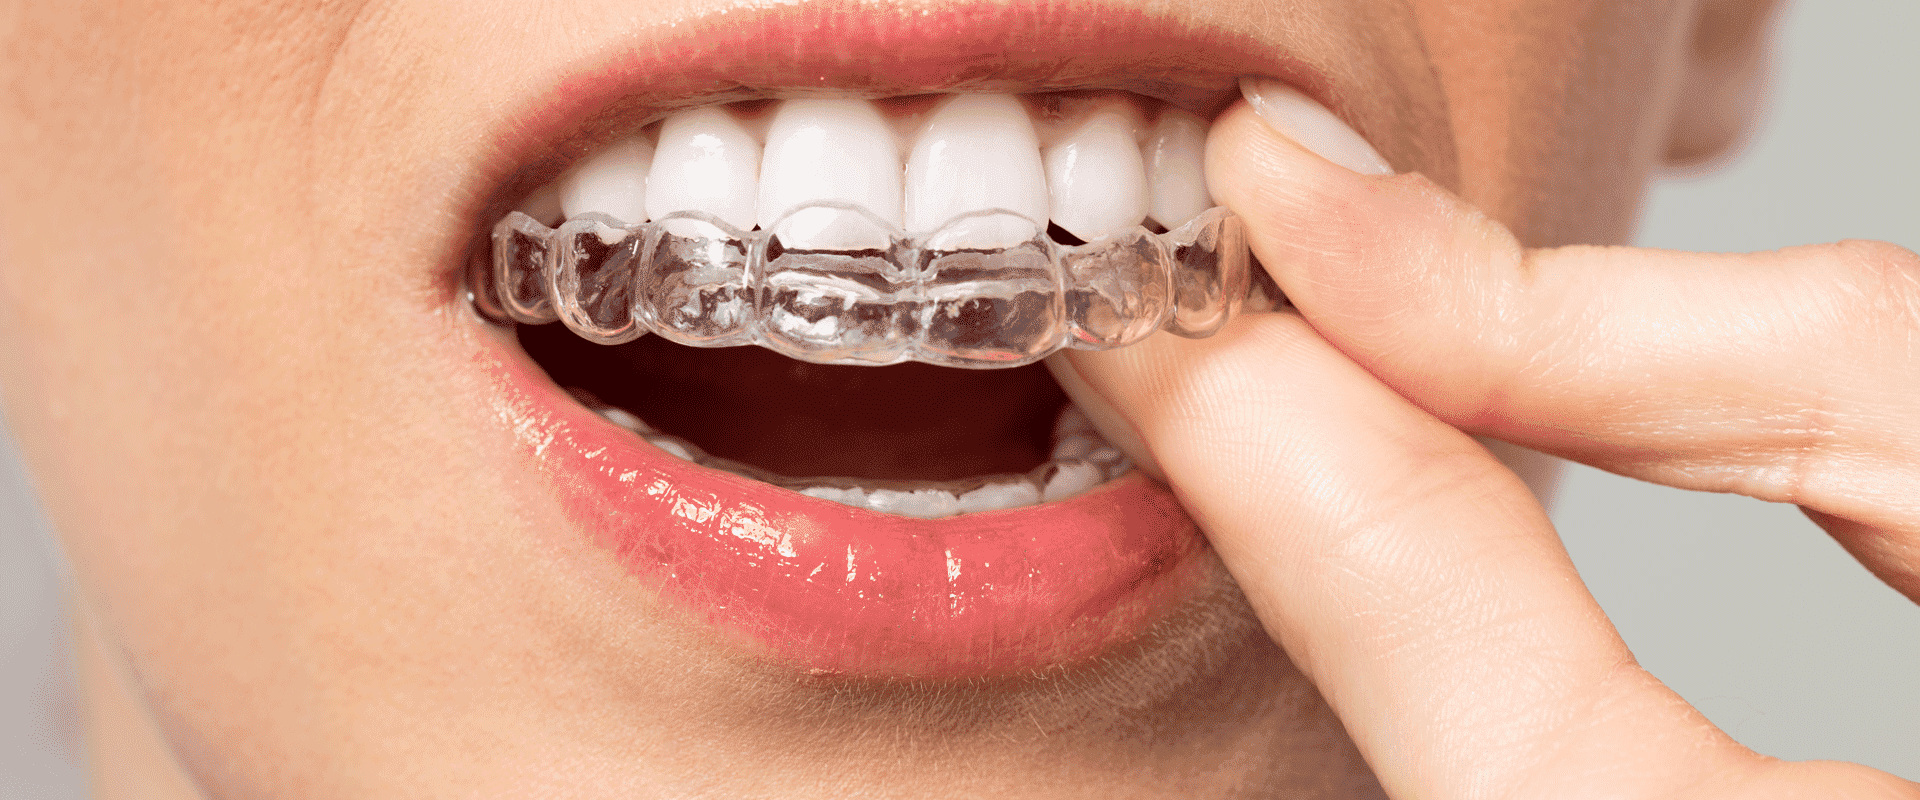 Invisalign Treatment Process: An Overview